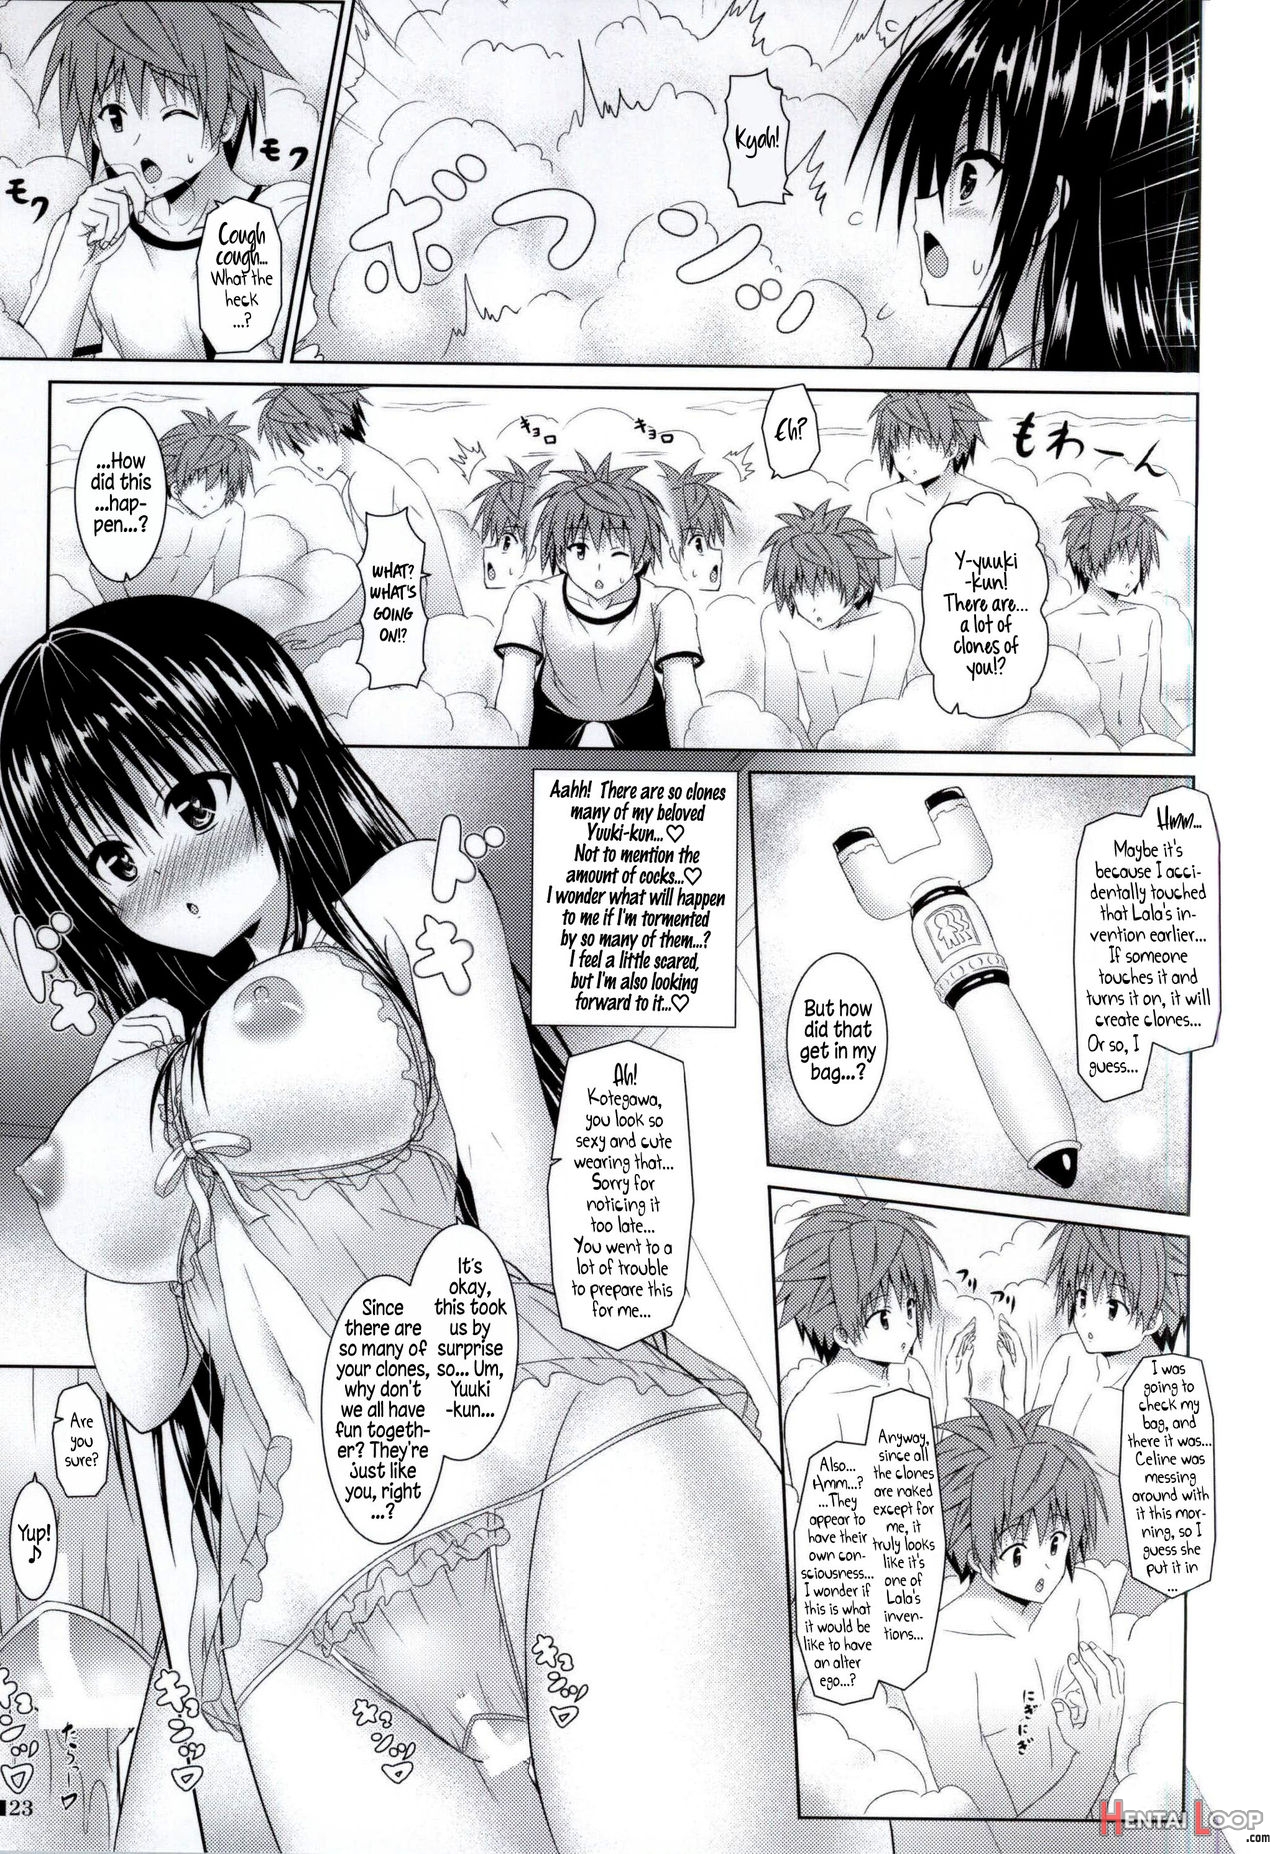 Together With Yui 3 page 23